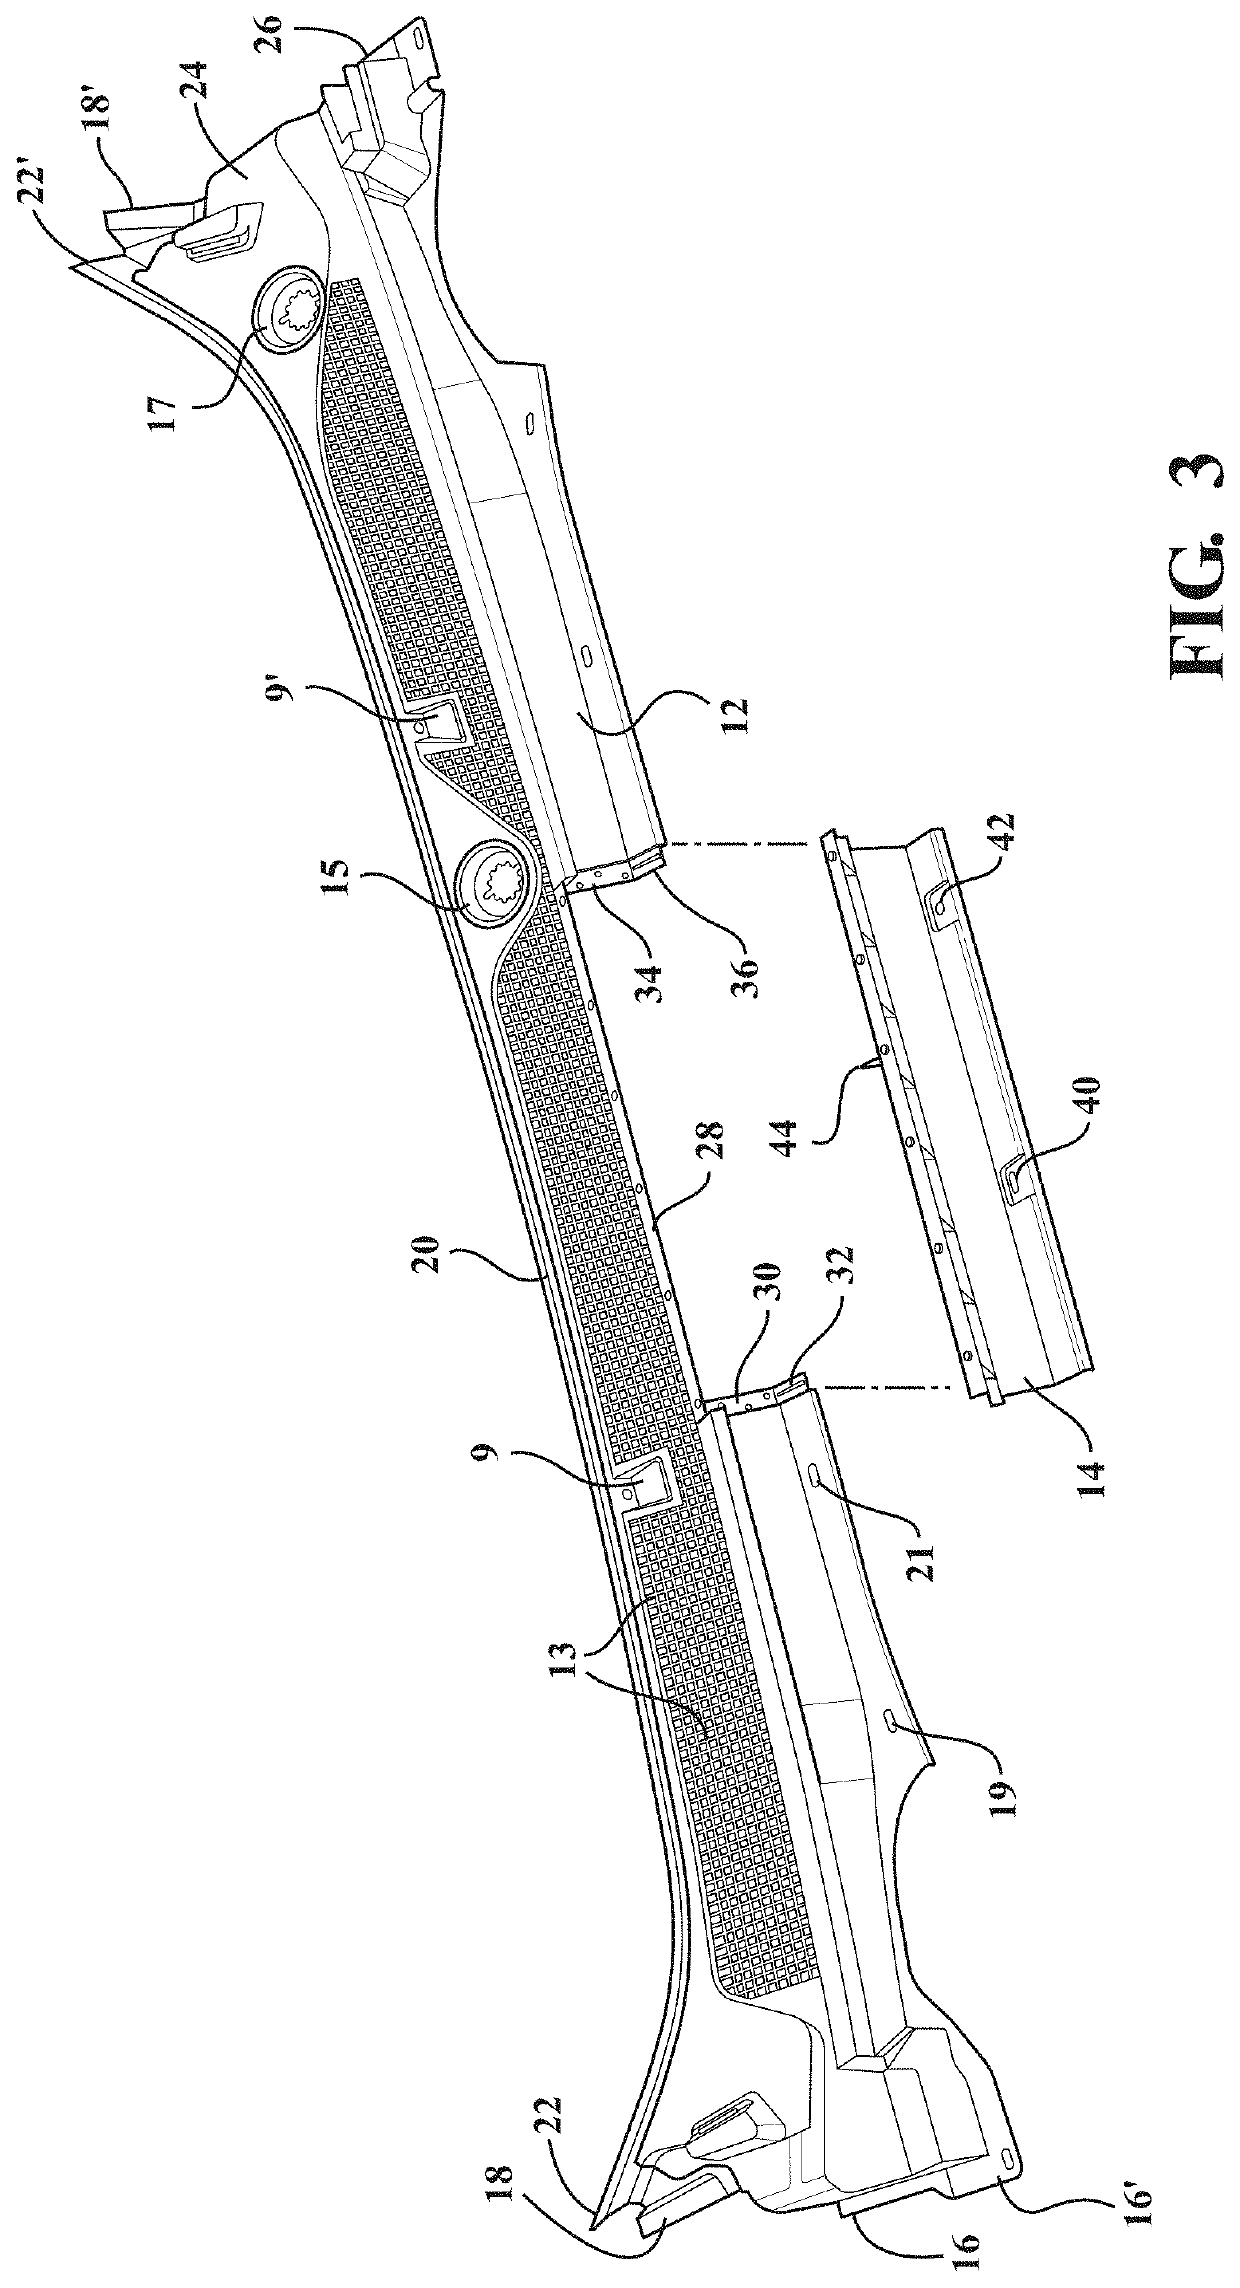 Method for producing a multi shot injection molded article incorporating a heat shield